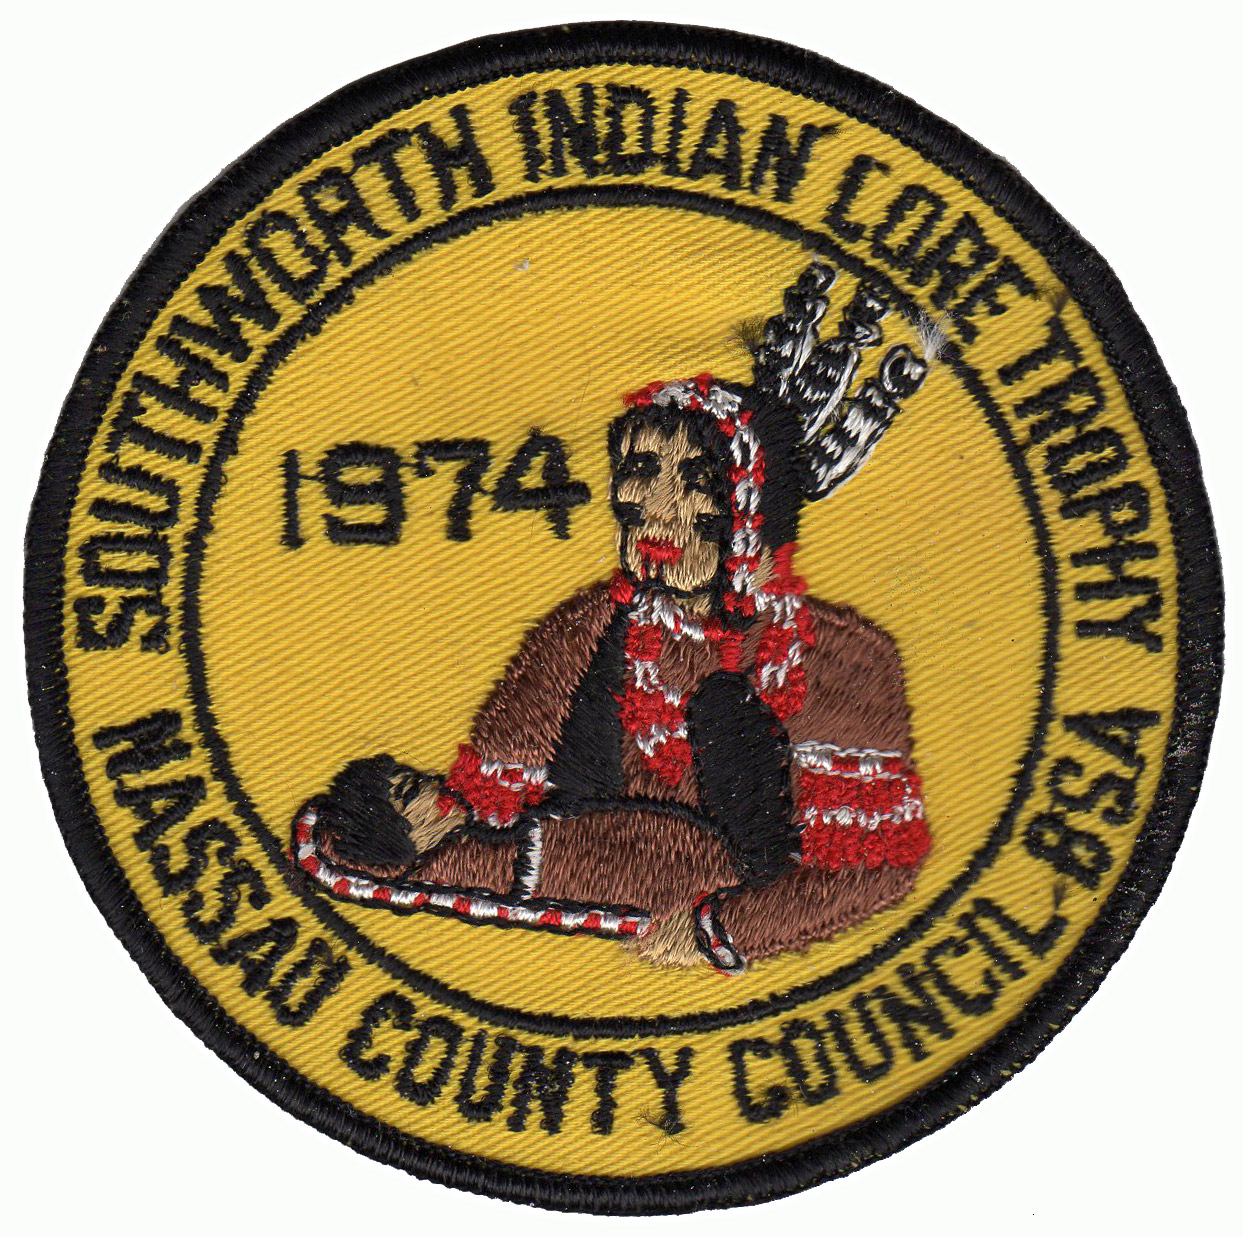 1974 Southworth Indian Lore